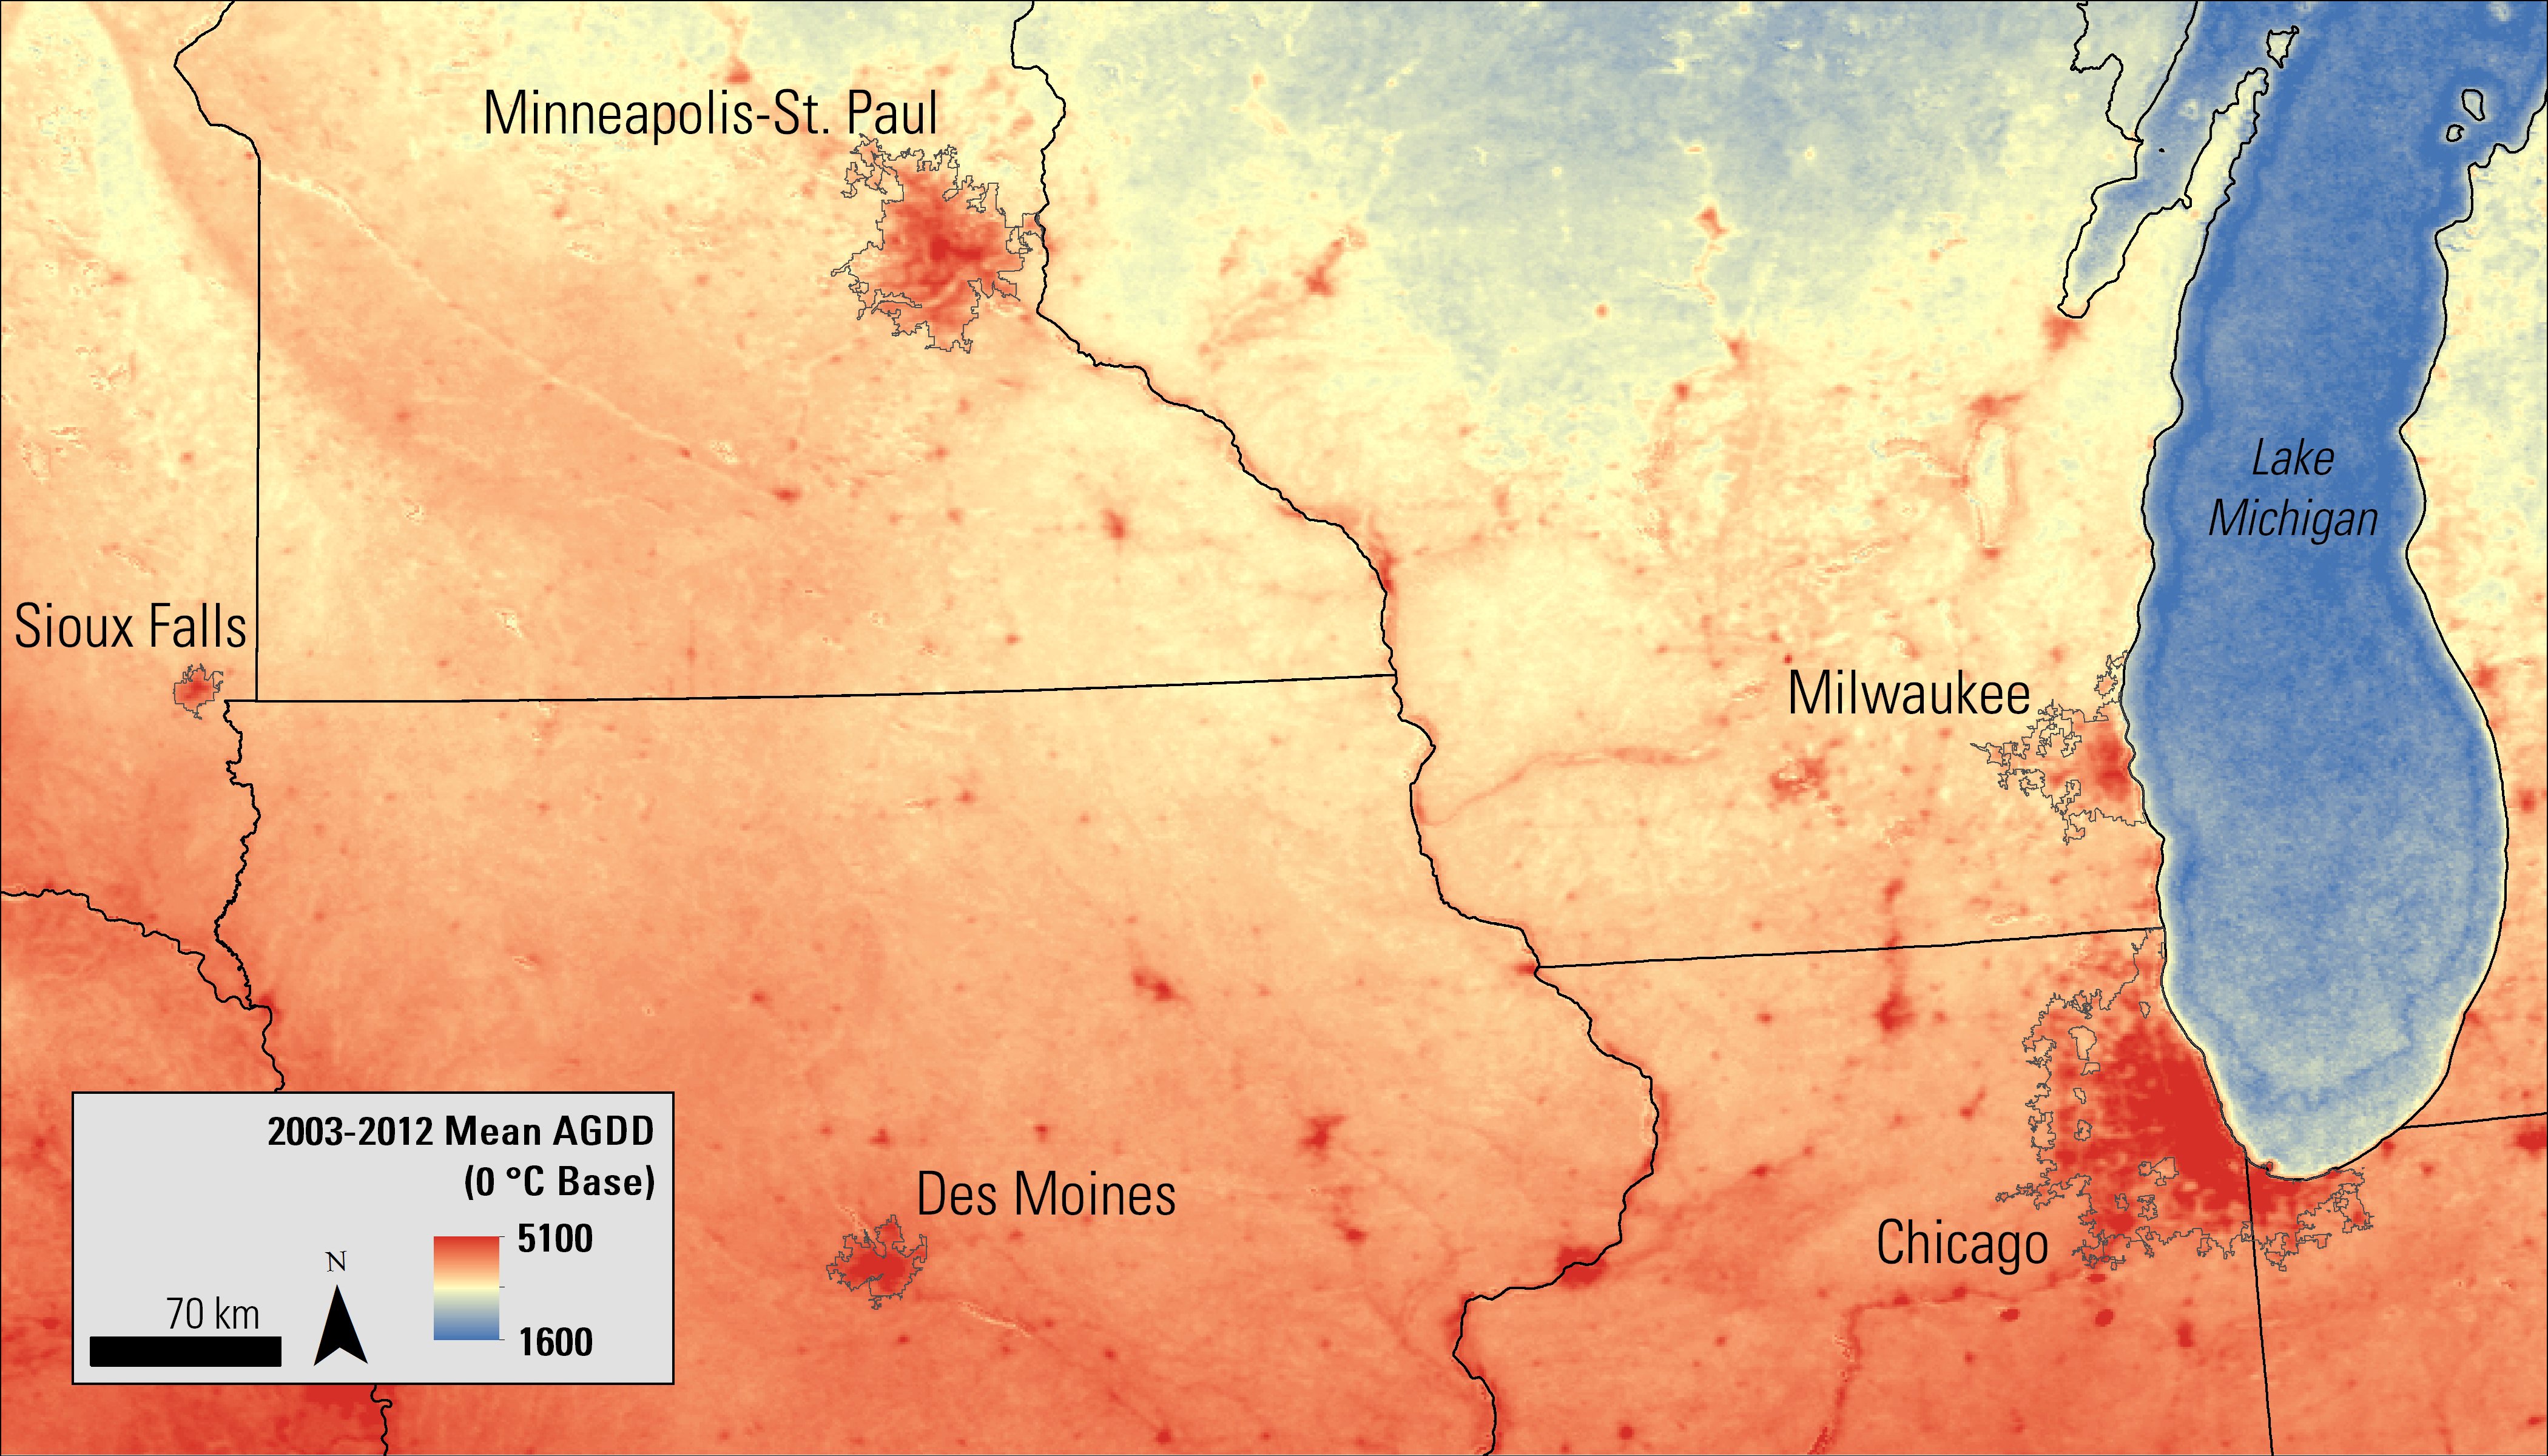 MODIS LST-derived Average Accumulated Growing Degree Days from 2003-2012 over the Midwest.